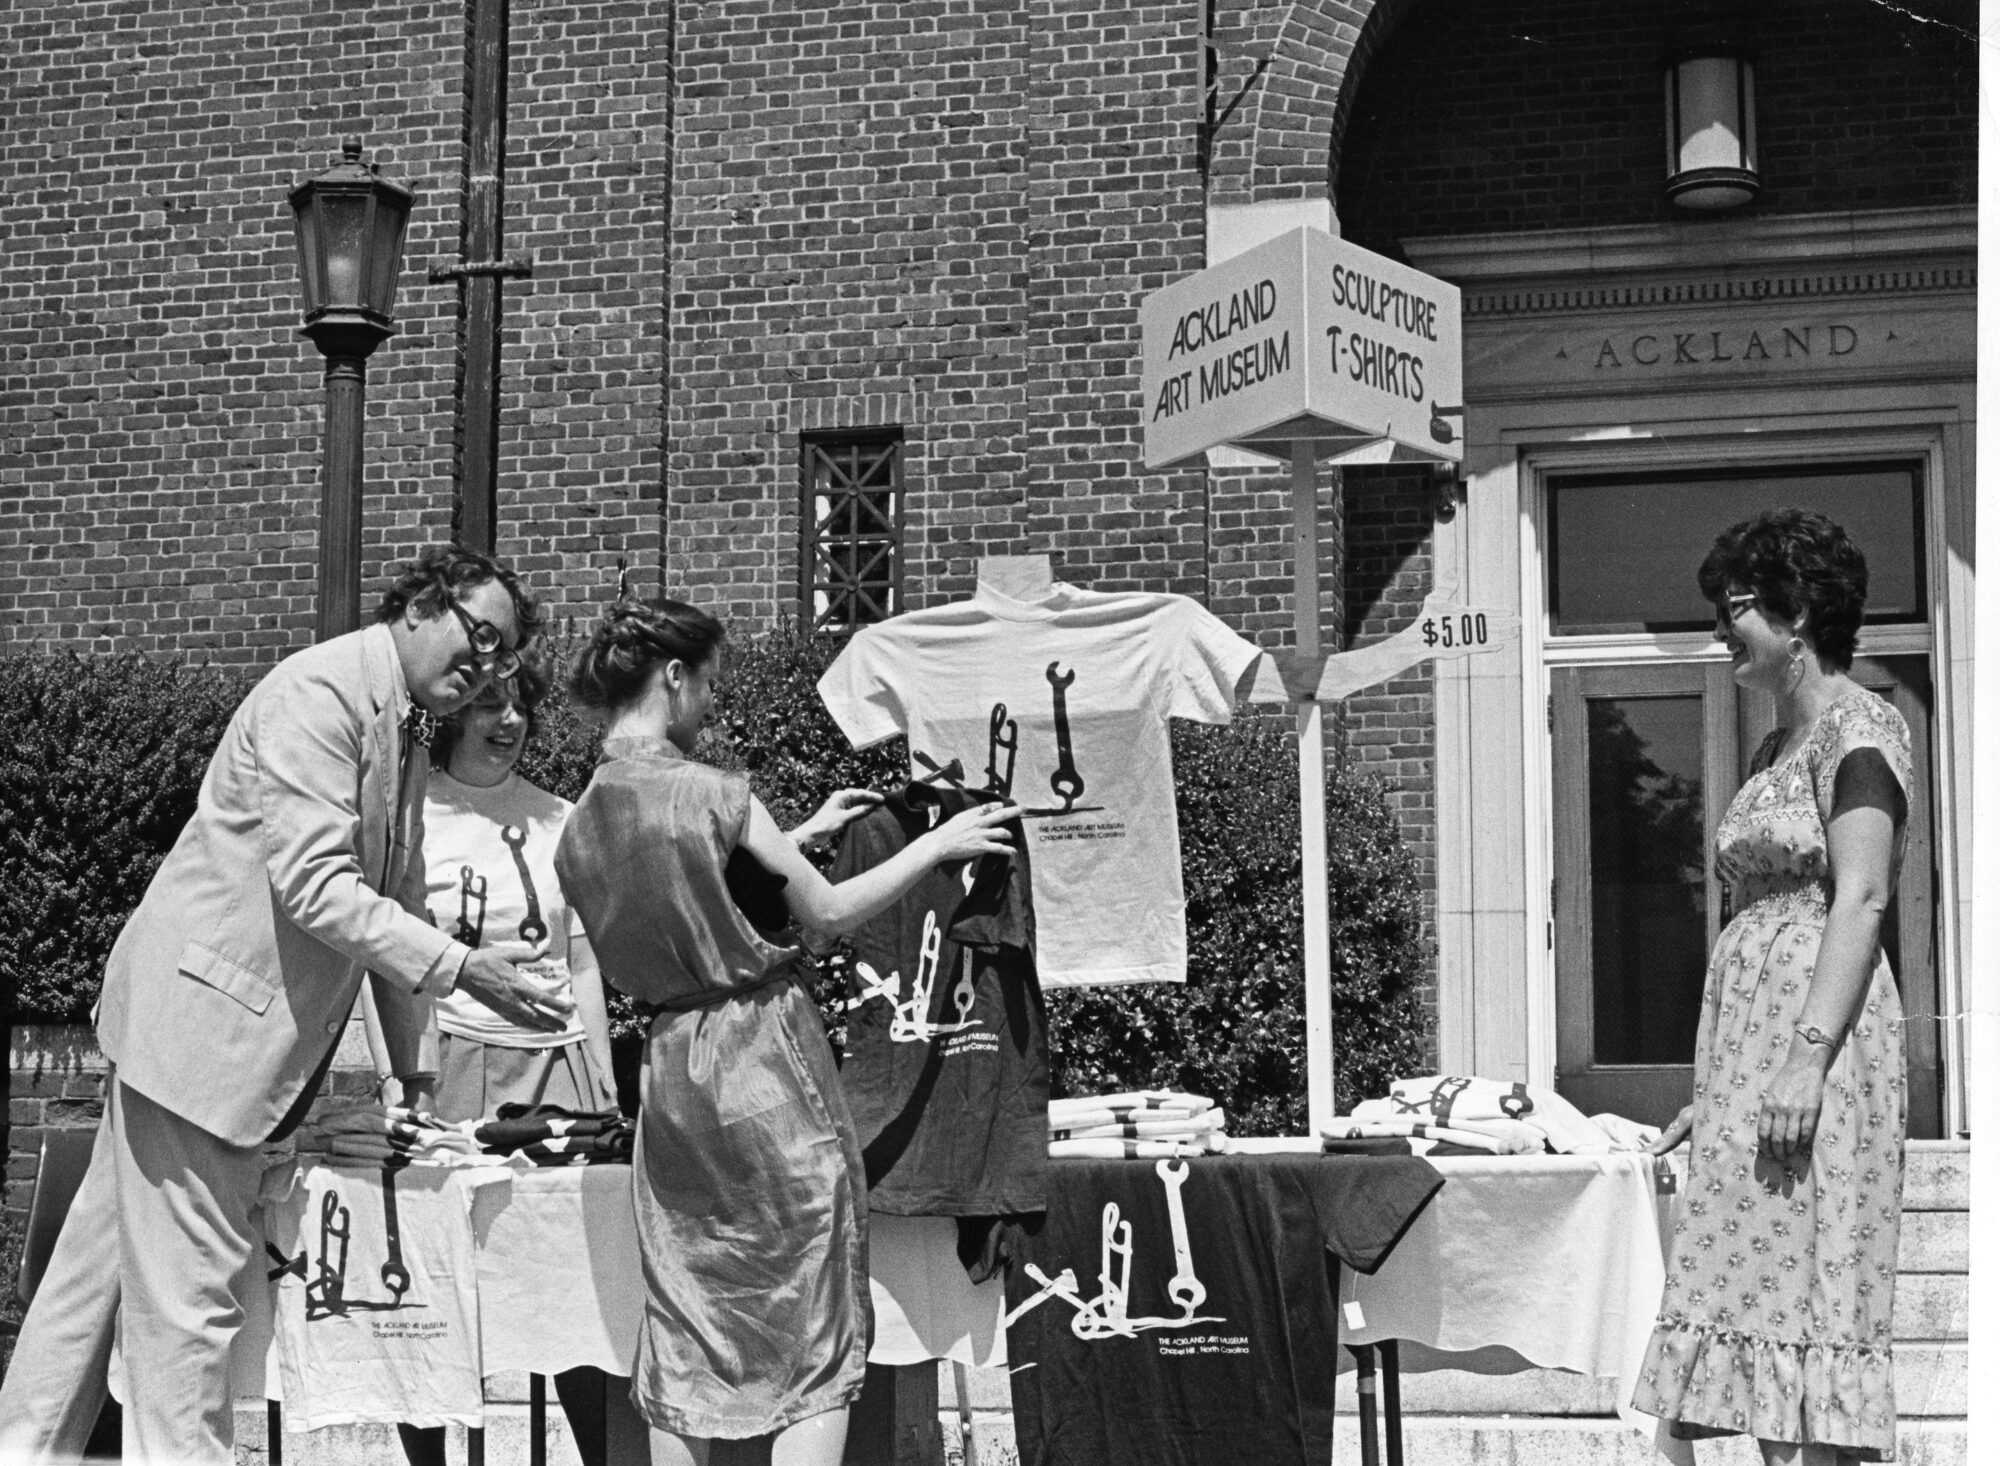 A group of four people looking at t-shirts on a table outdoors